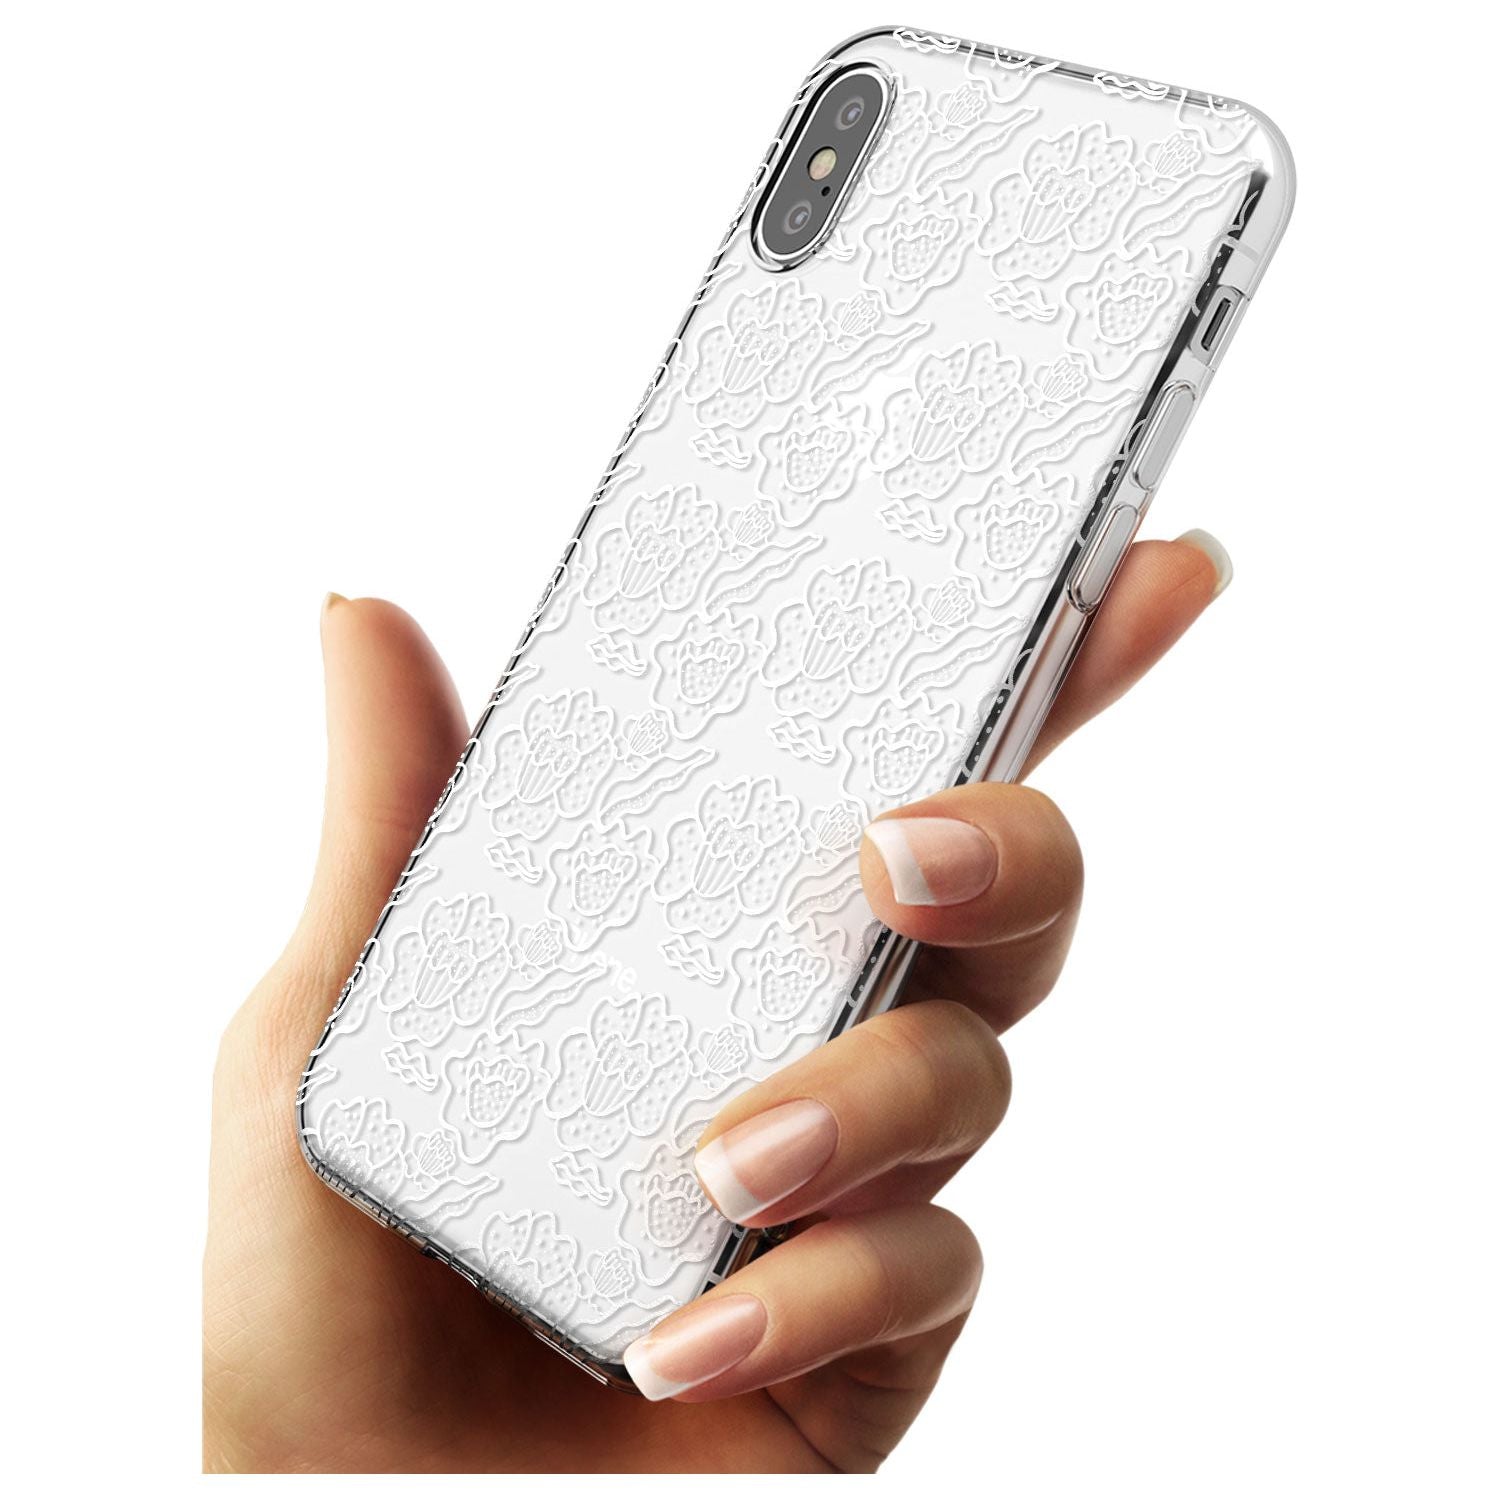 Funky Floral Patterns White on Clear Slim TPU Phone Case Warehouse X XS Max XR